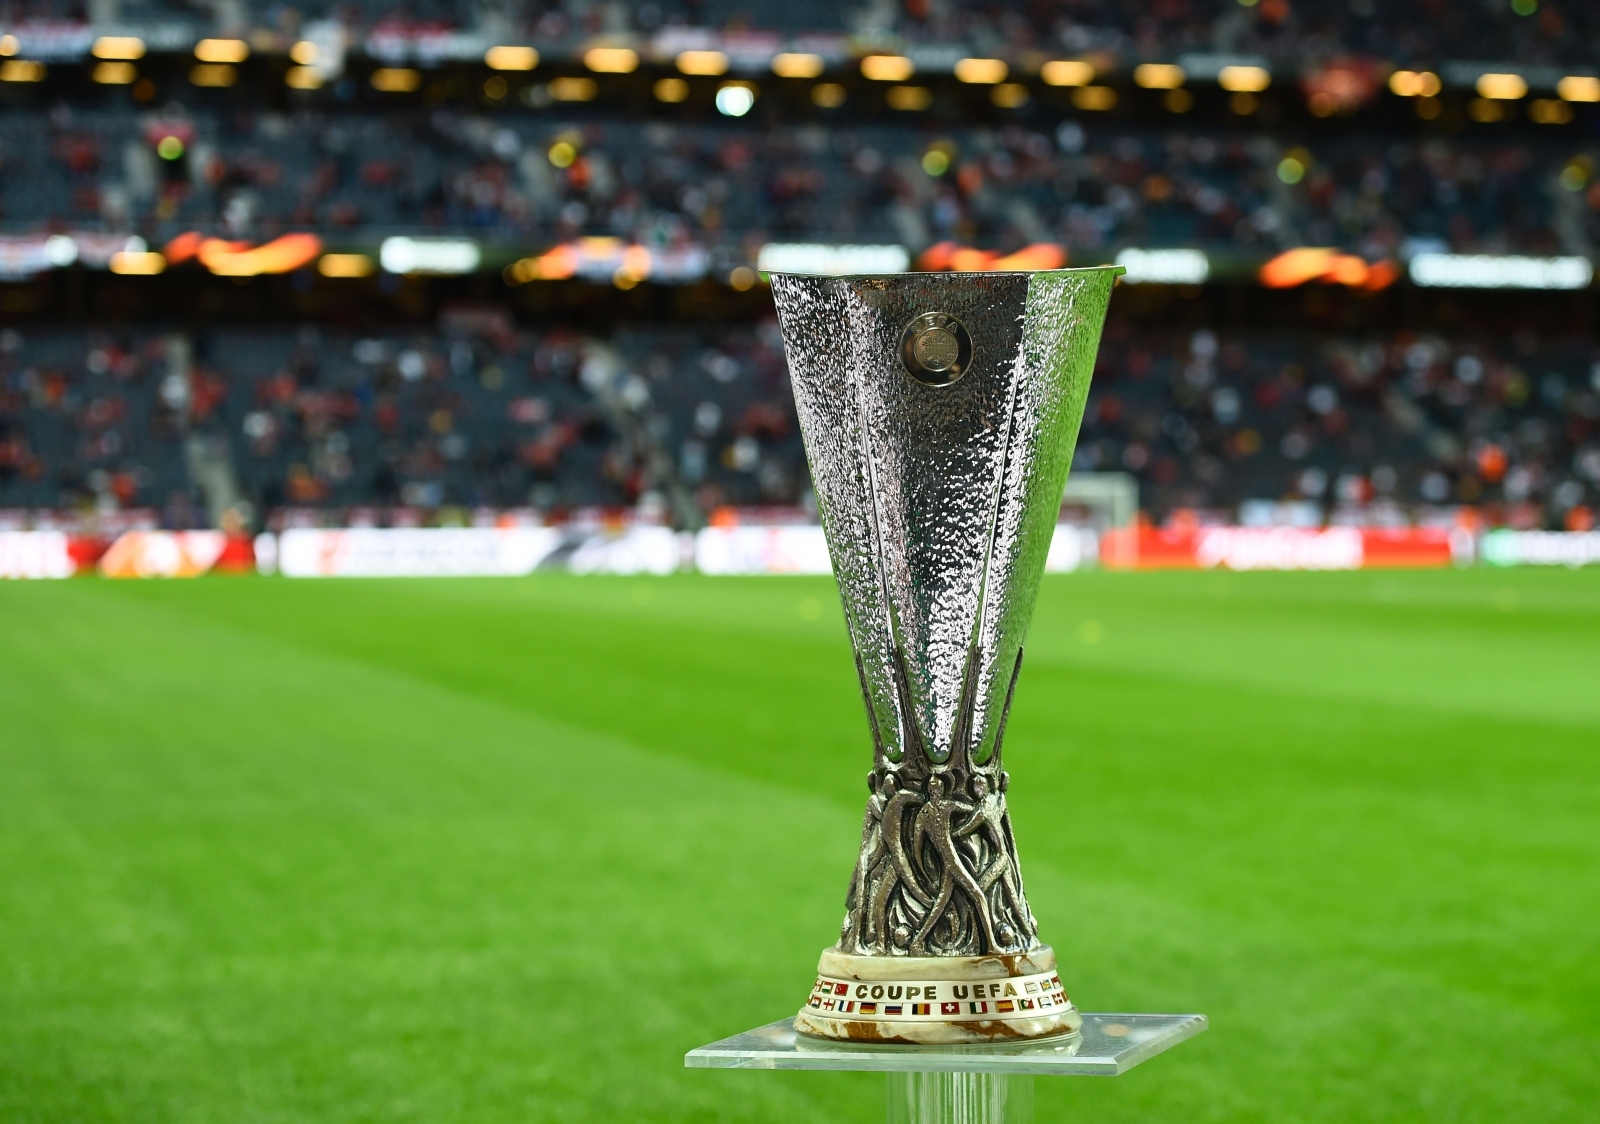 Uefa Europa League 2017-18 group stage draw live - Arsenal and Everton